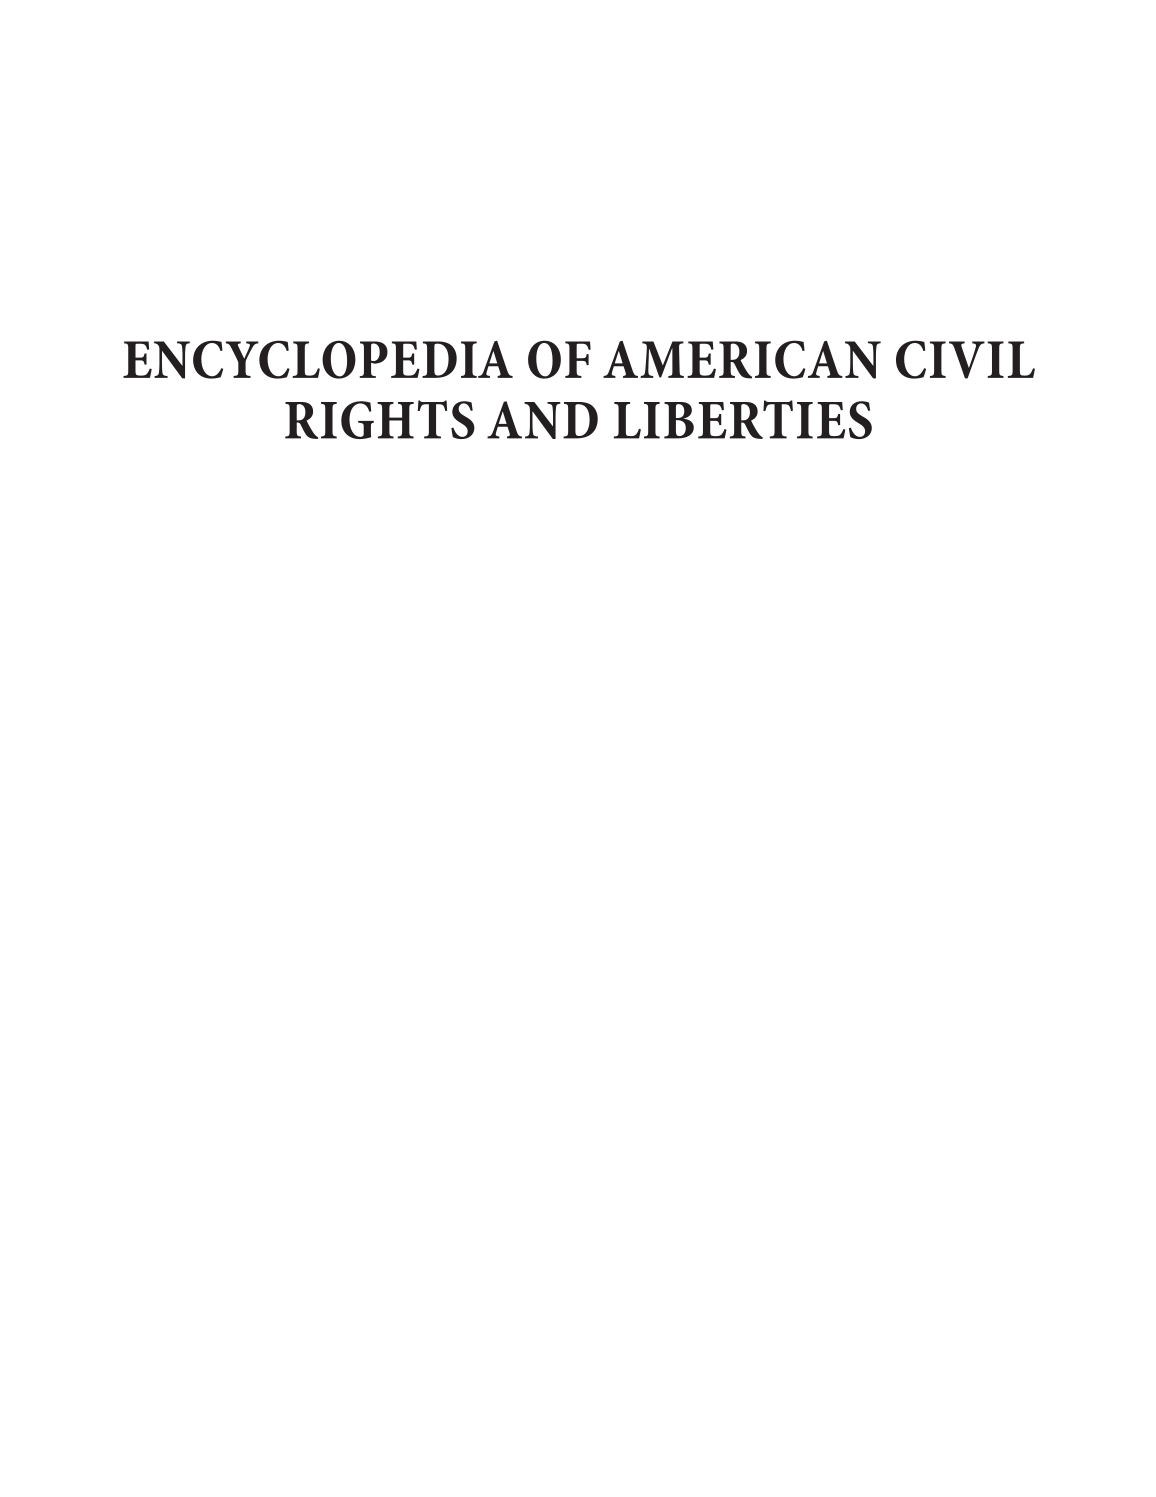 Encyclopedia of American Civil Rights and Liberties: Revised and Expanded Edition, 2nd Edition [4 volumes] page Vol-1:i